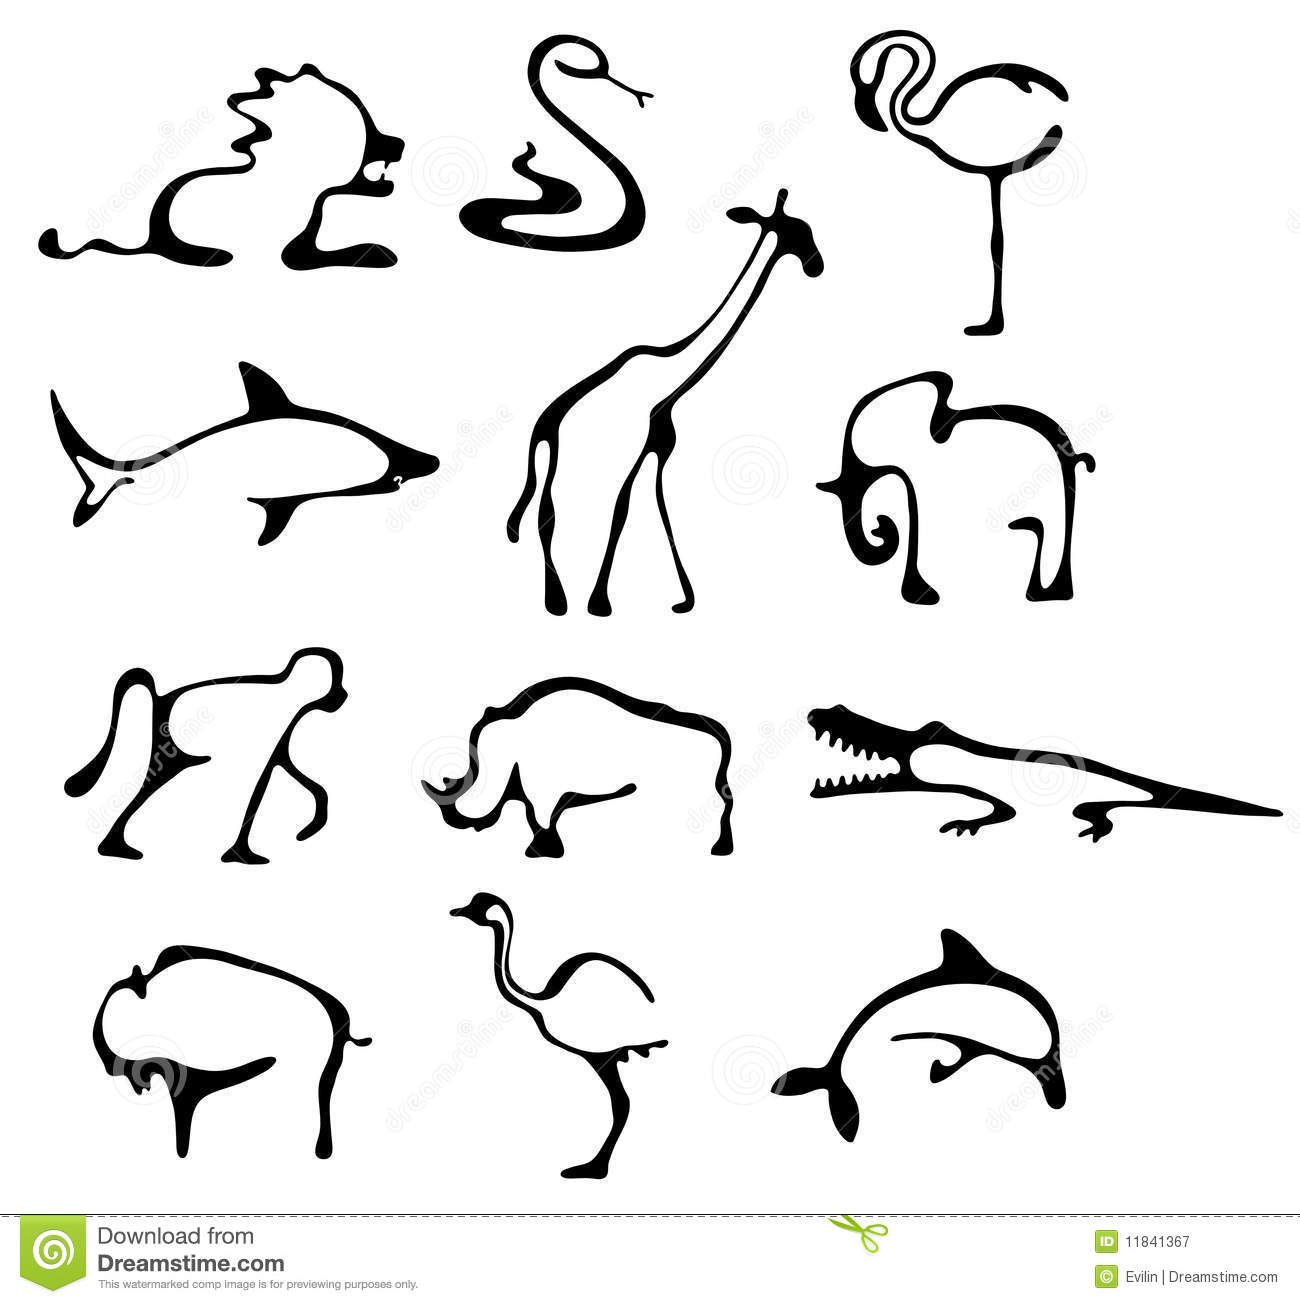 10 Simple Animal Icons Images